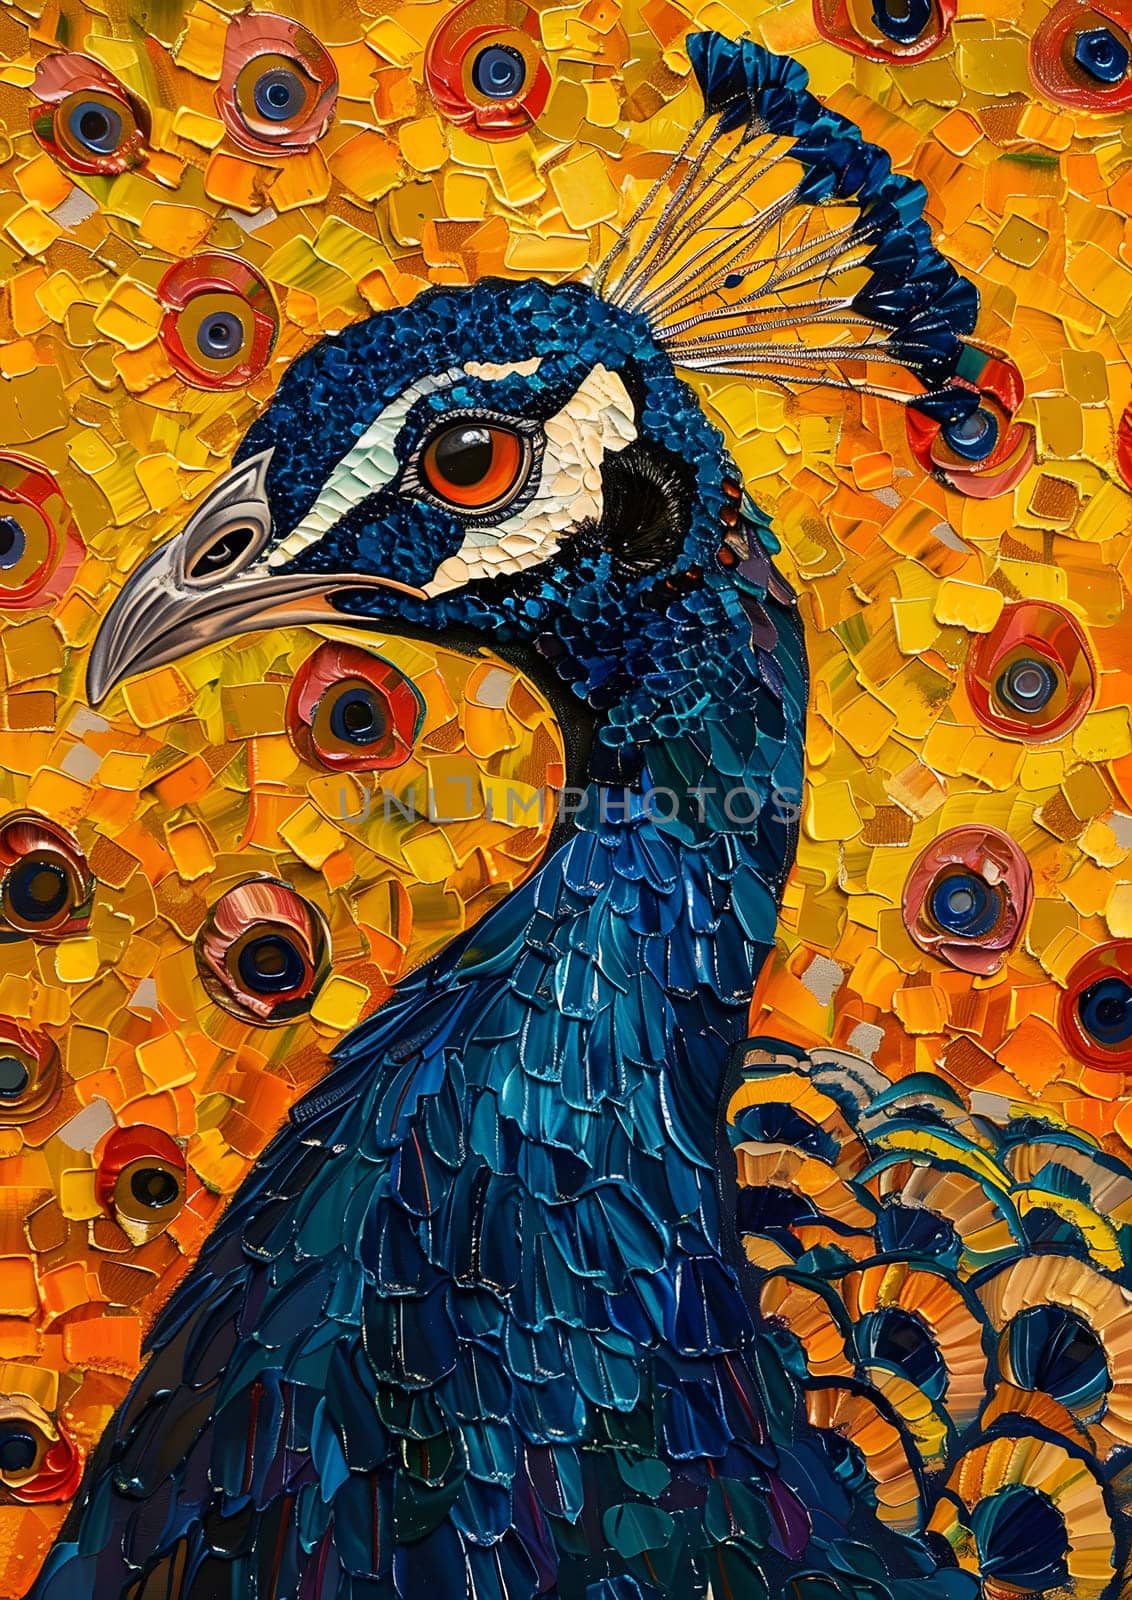 A stunning painting of a peacock, a bird in the Phasianidae family. The vibrant feathers and intricate details stand out against the yellow background